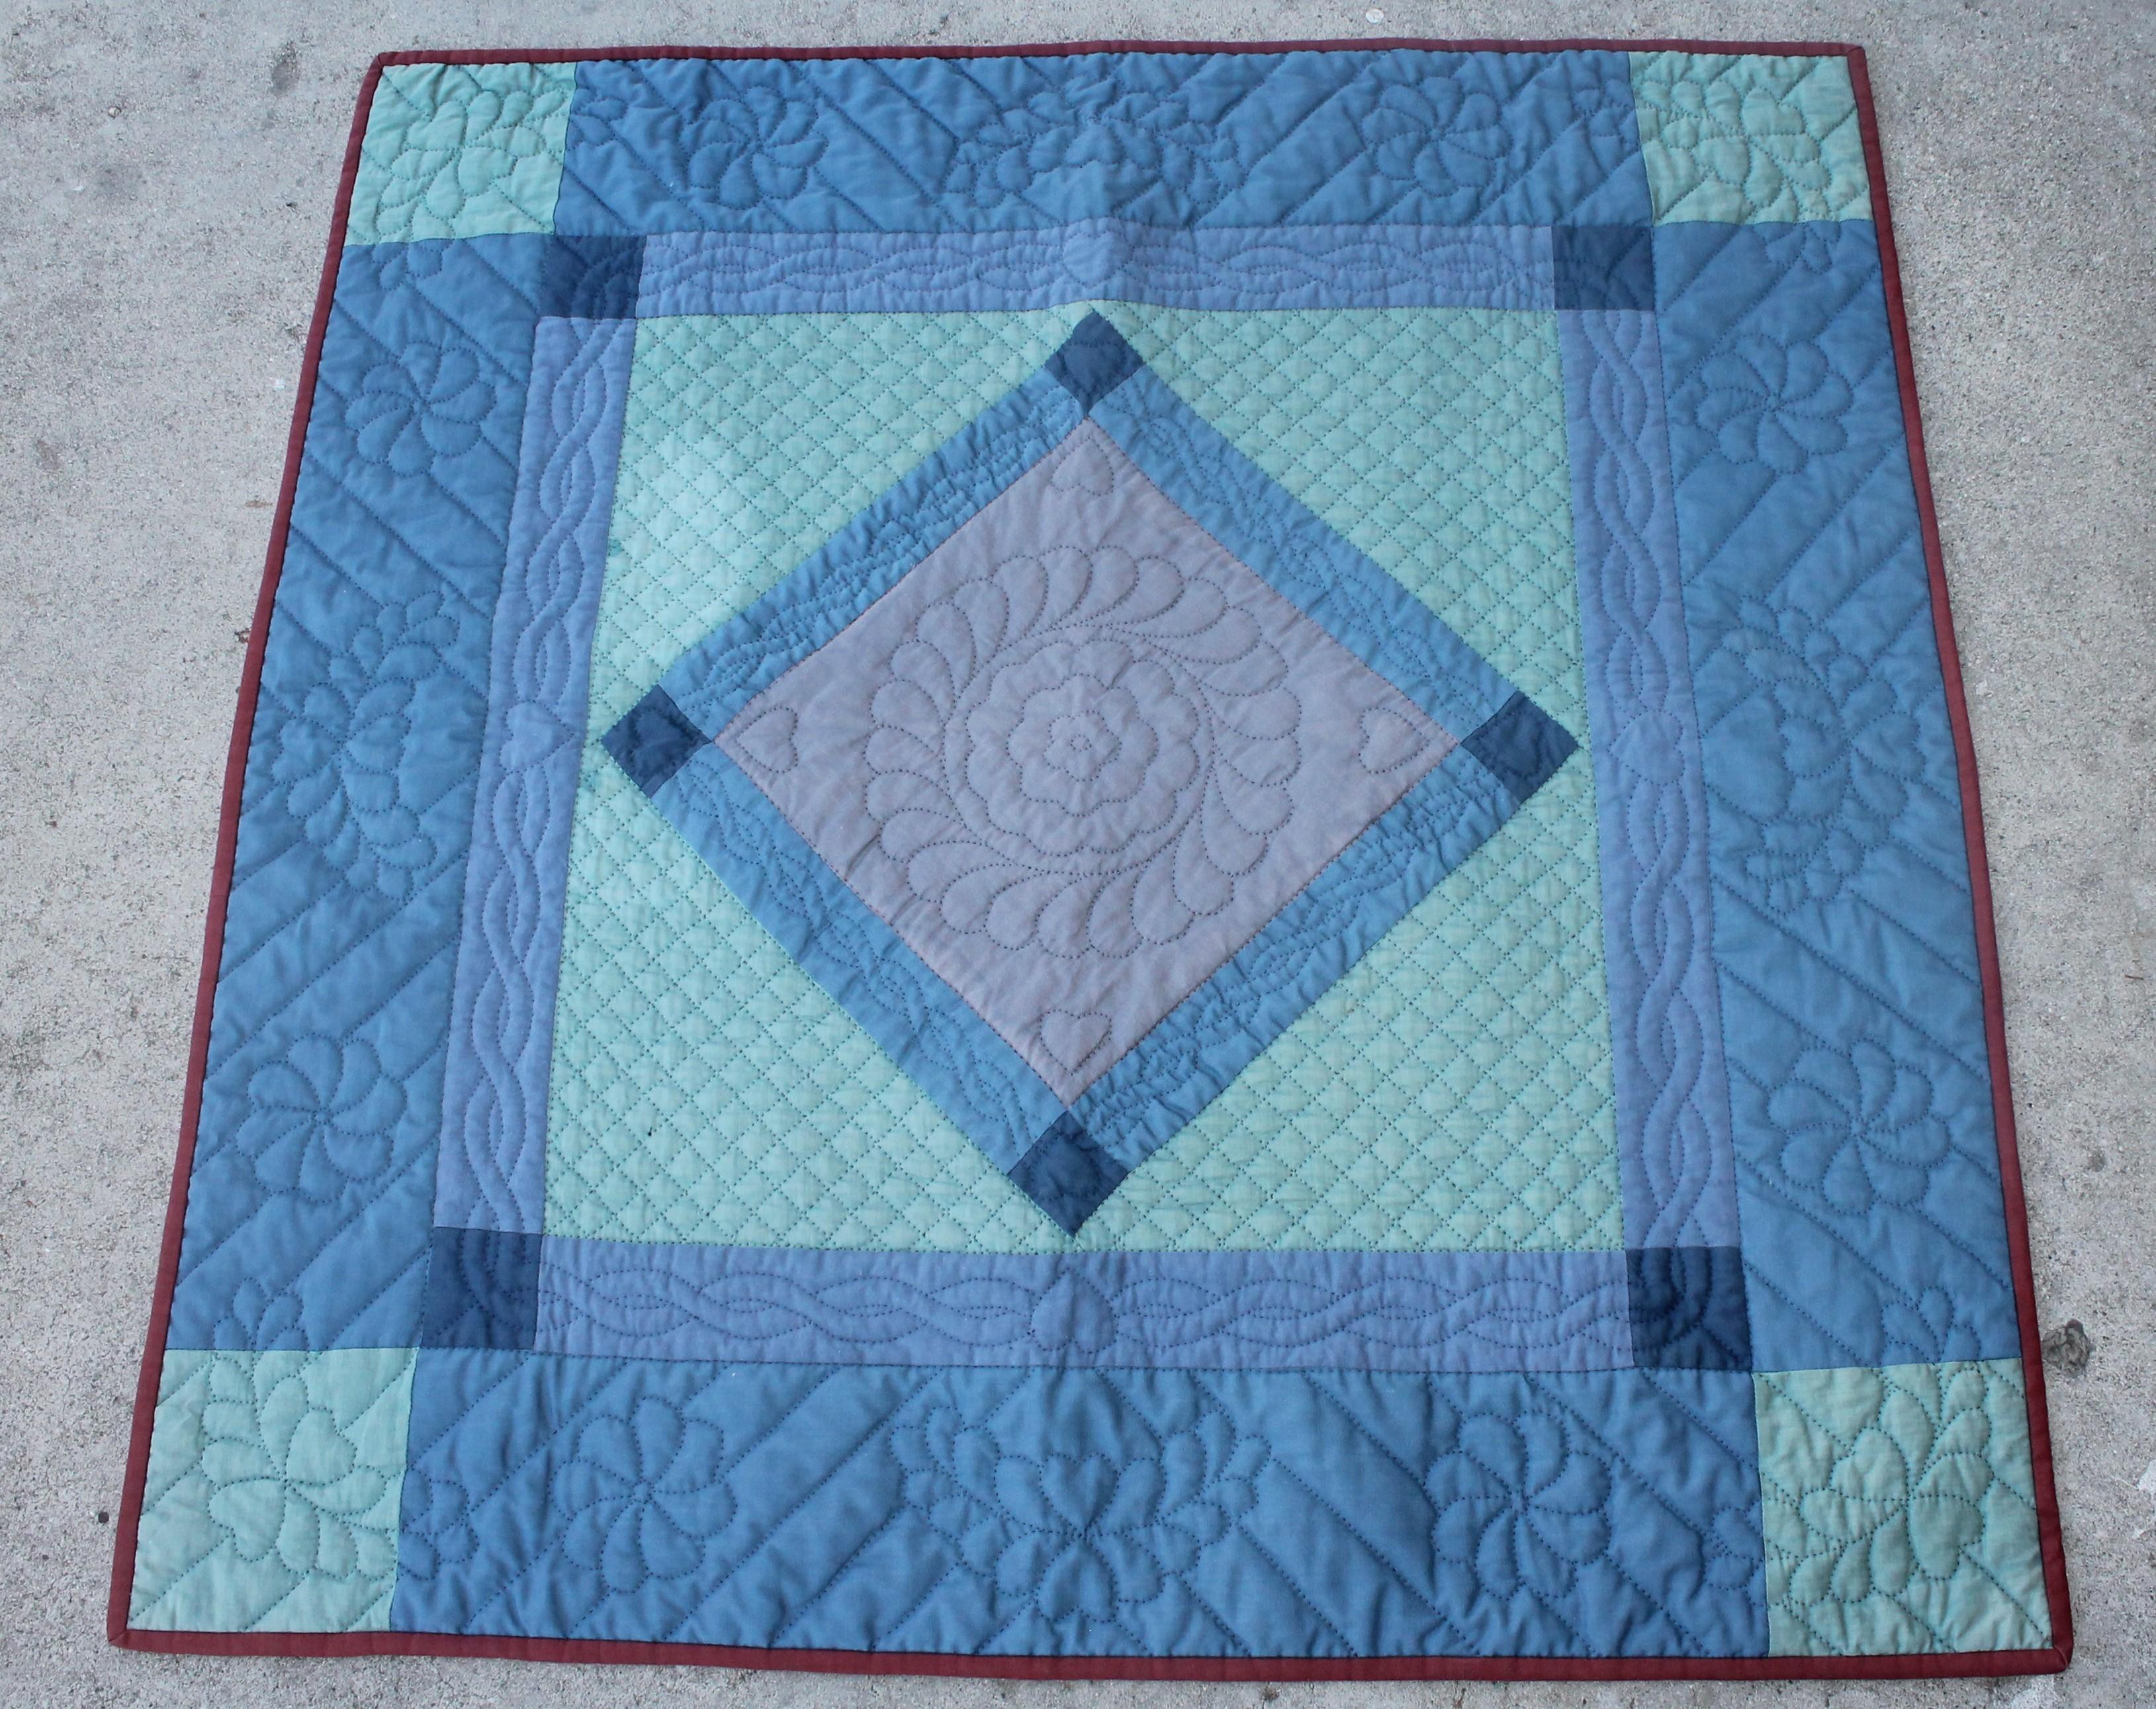 This Fine Amish Lancaster County cotton crib quilt is in Fine condition. This wonderfully pieced and quilt crib quilt has a slight fade but very sharp condition. Great Folk Art or wall art. These Lancaster County diamond in a square crib quilts are